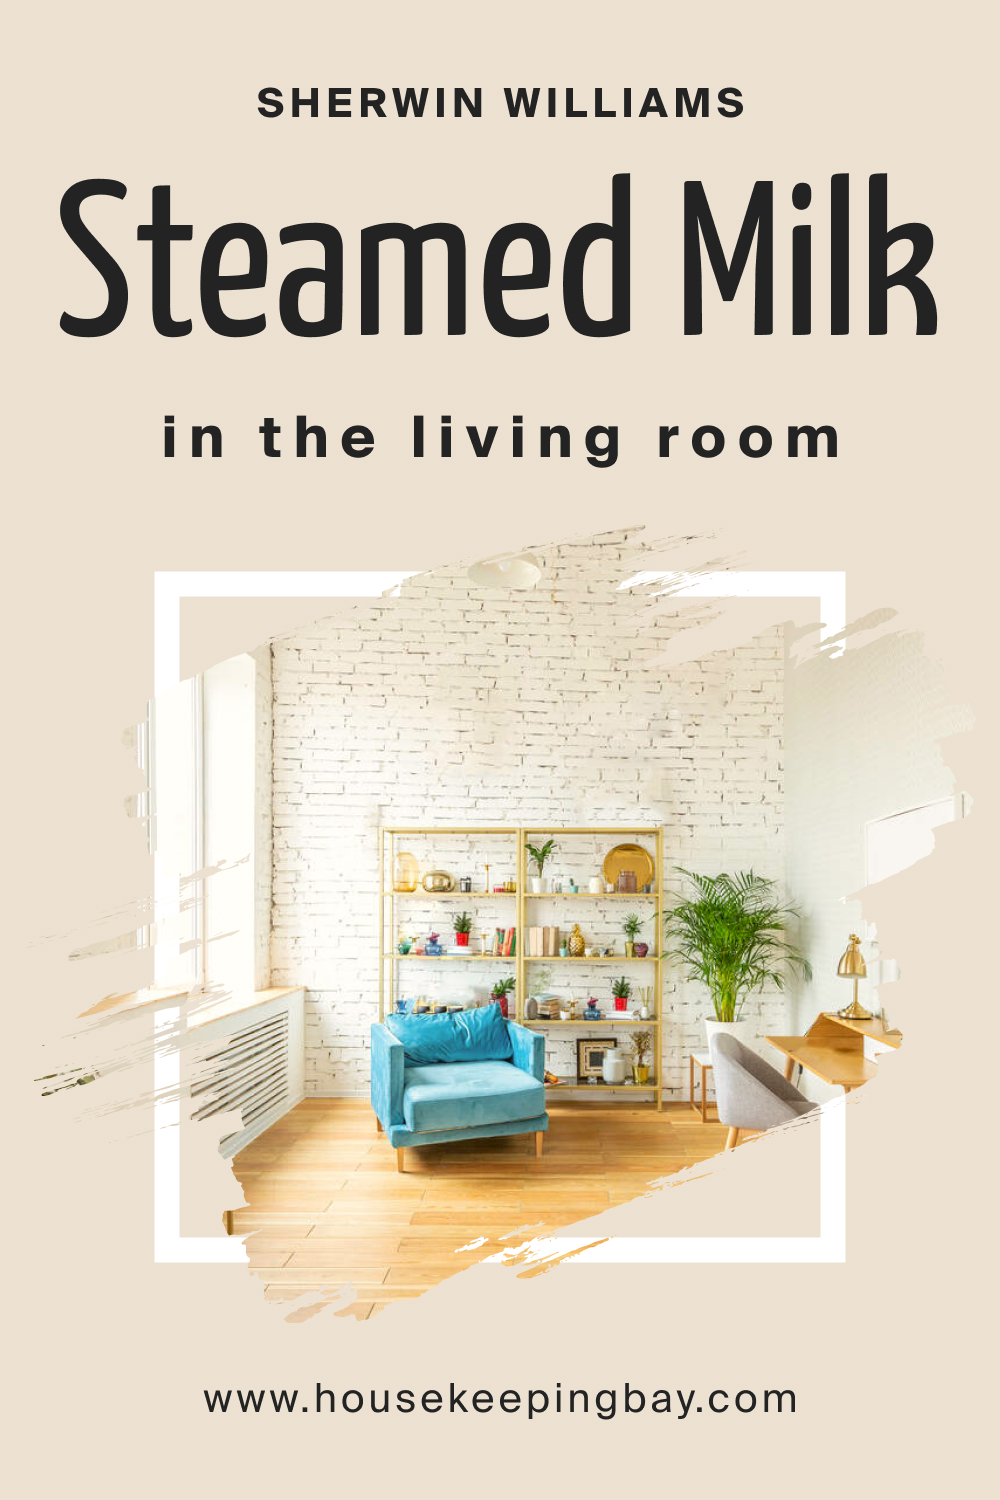 Sherwin Williams. SW Steamed Milk In the Living Room